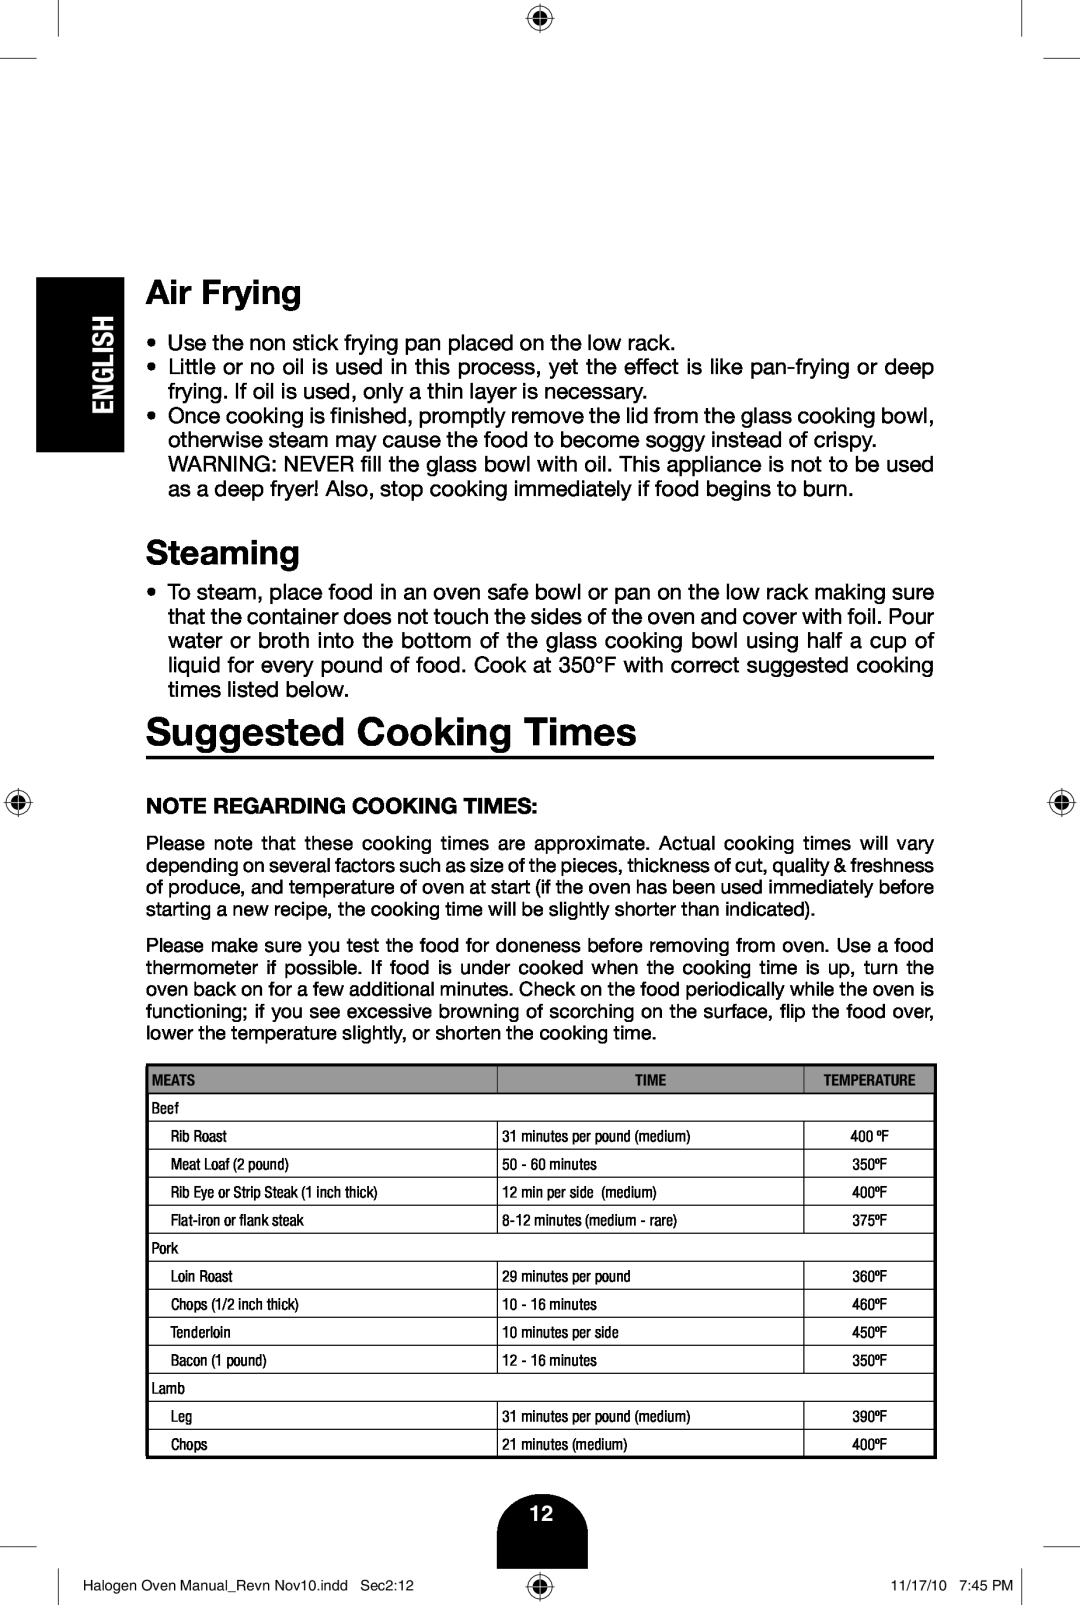 Fagor America 670040380 user manual Suggested Cooking Times, Air Frying, Steaming, English 